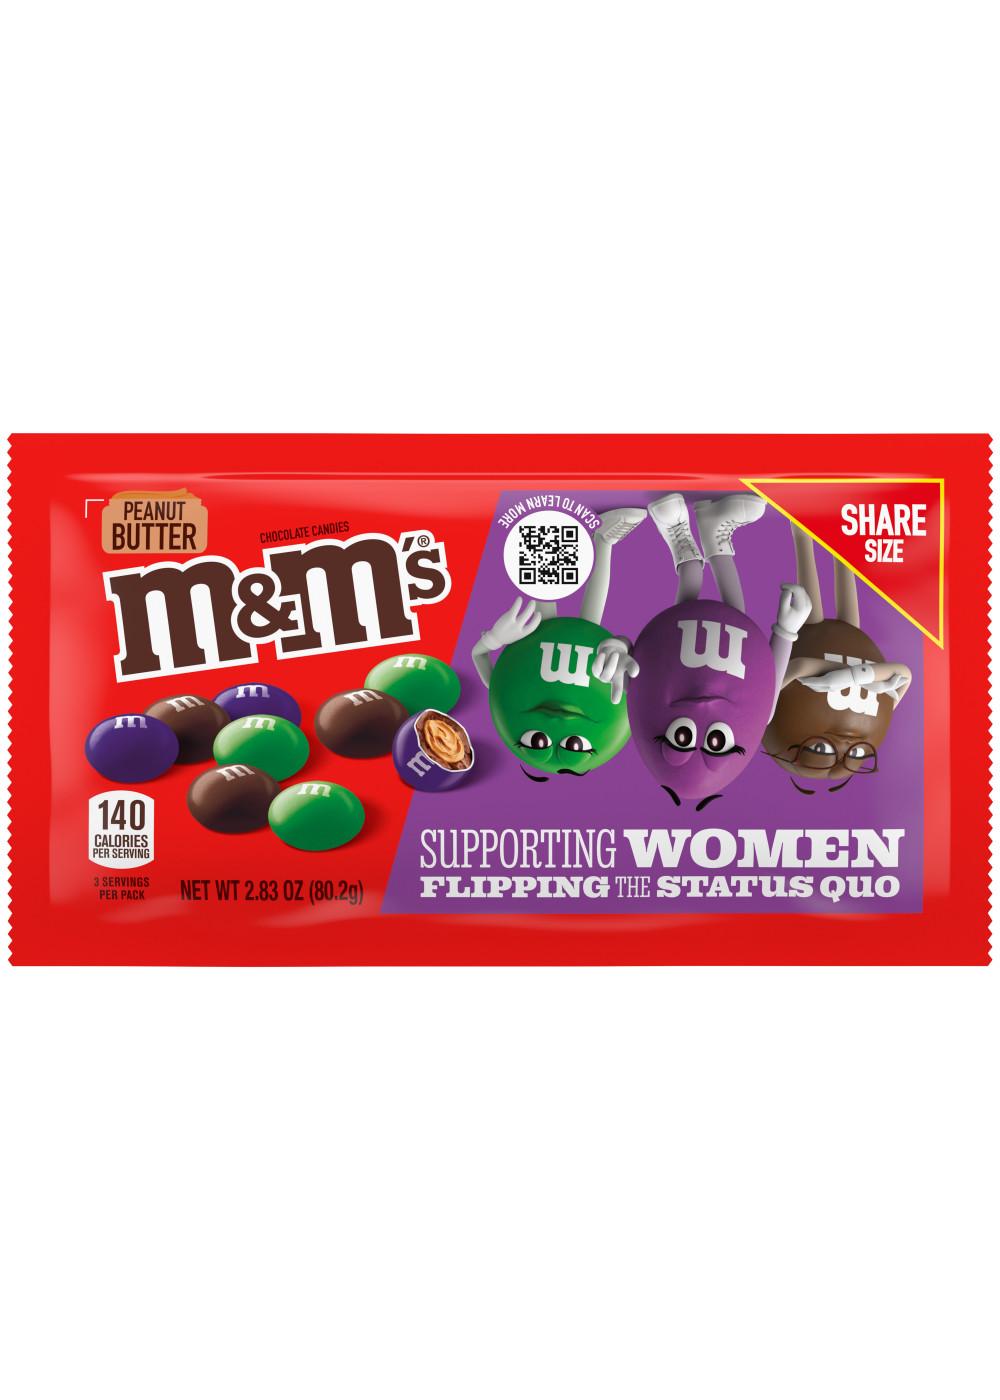 M&M'S Limited Edition Peanut Butter Chocolate Candy - Purple